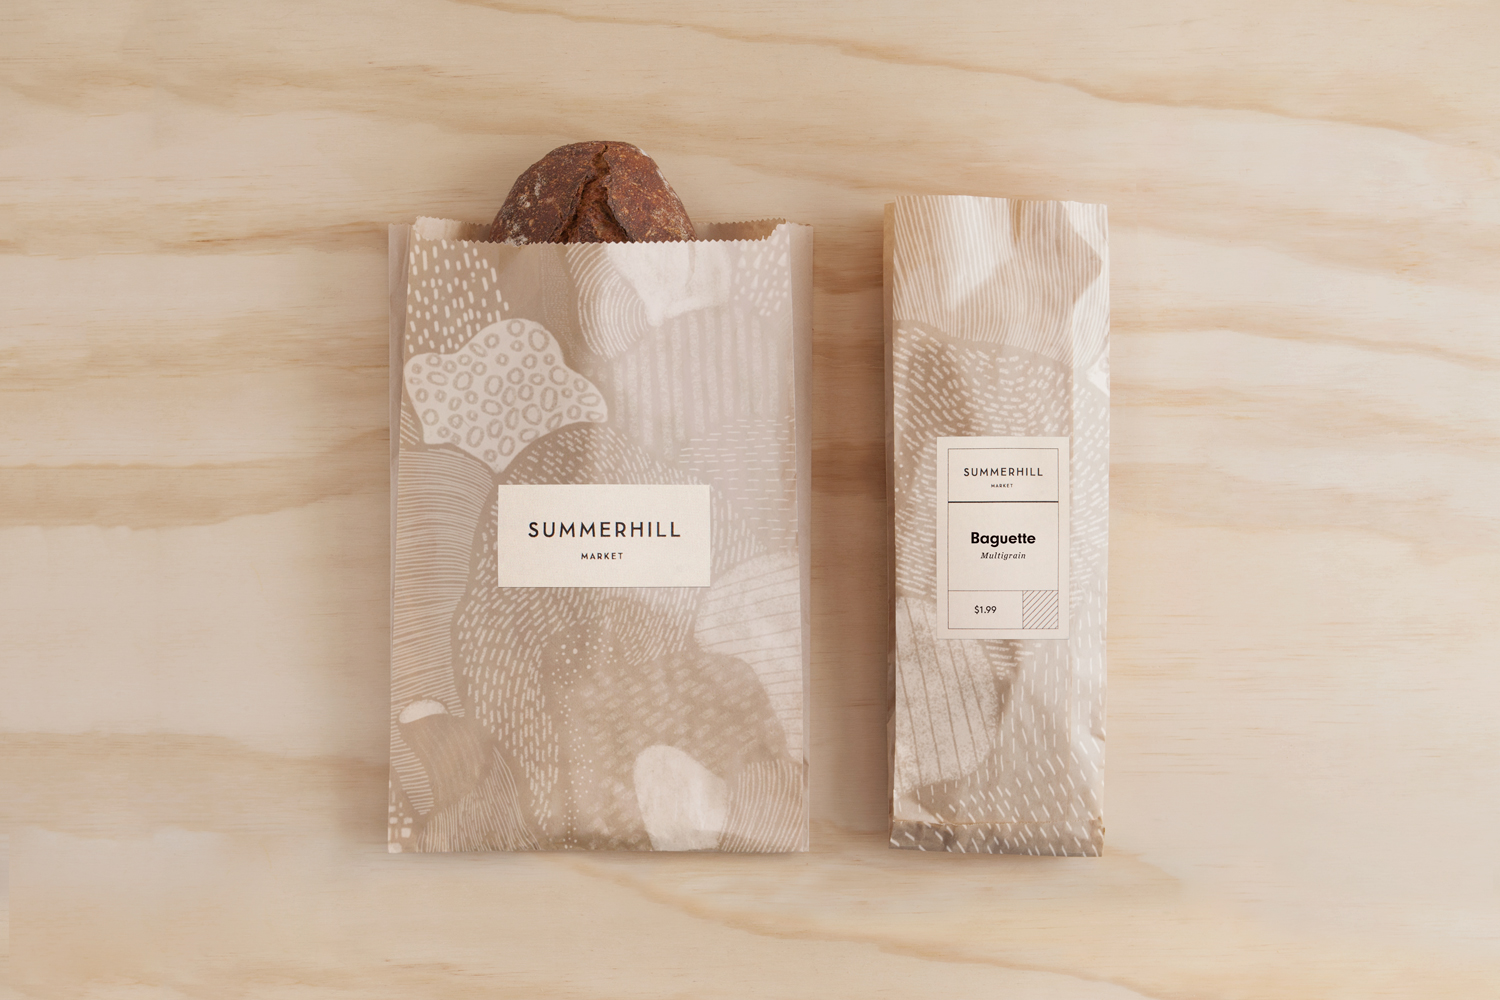 Branding and illustrated bread bags designed by Canadian studio Blok for Toronto based boutique grocery store Summerhill Market